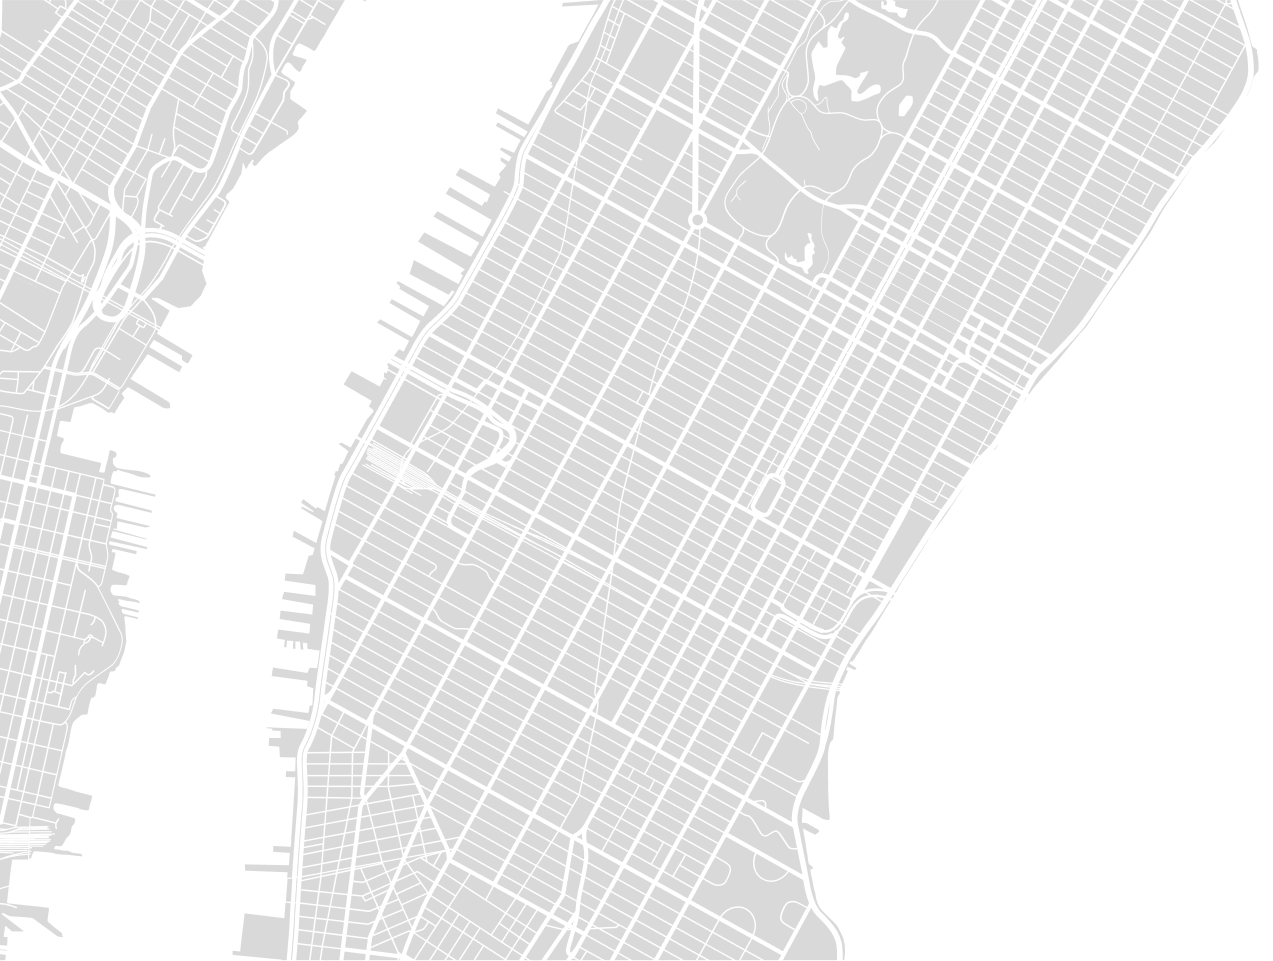 new york outline png